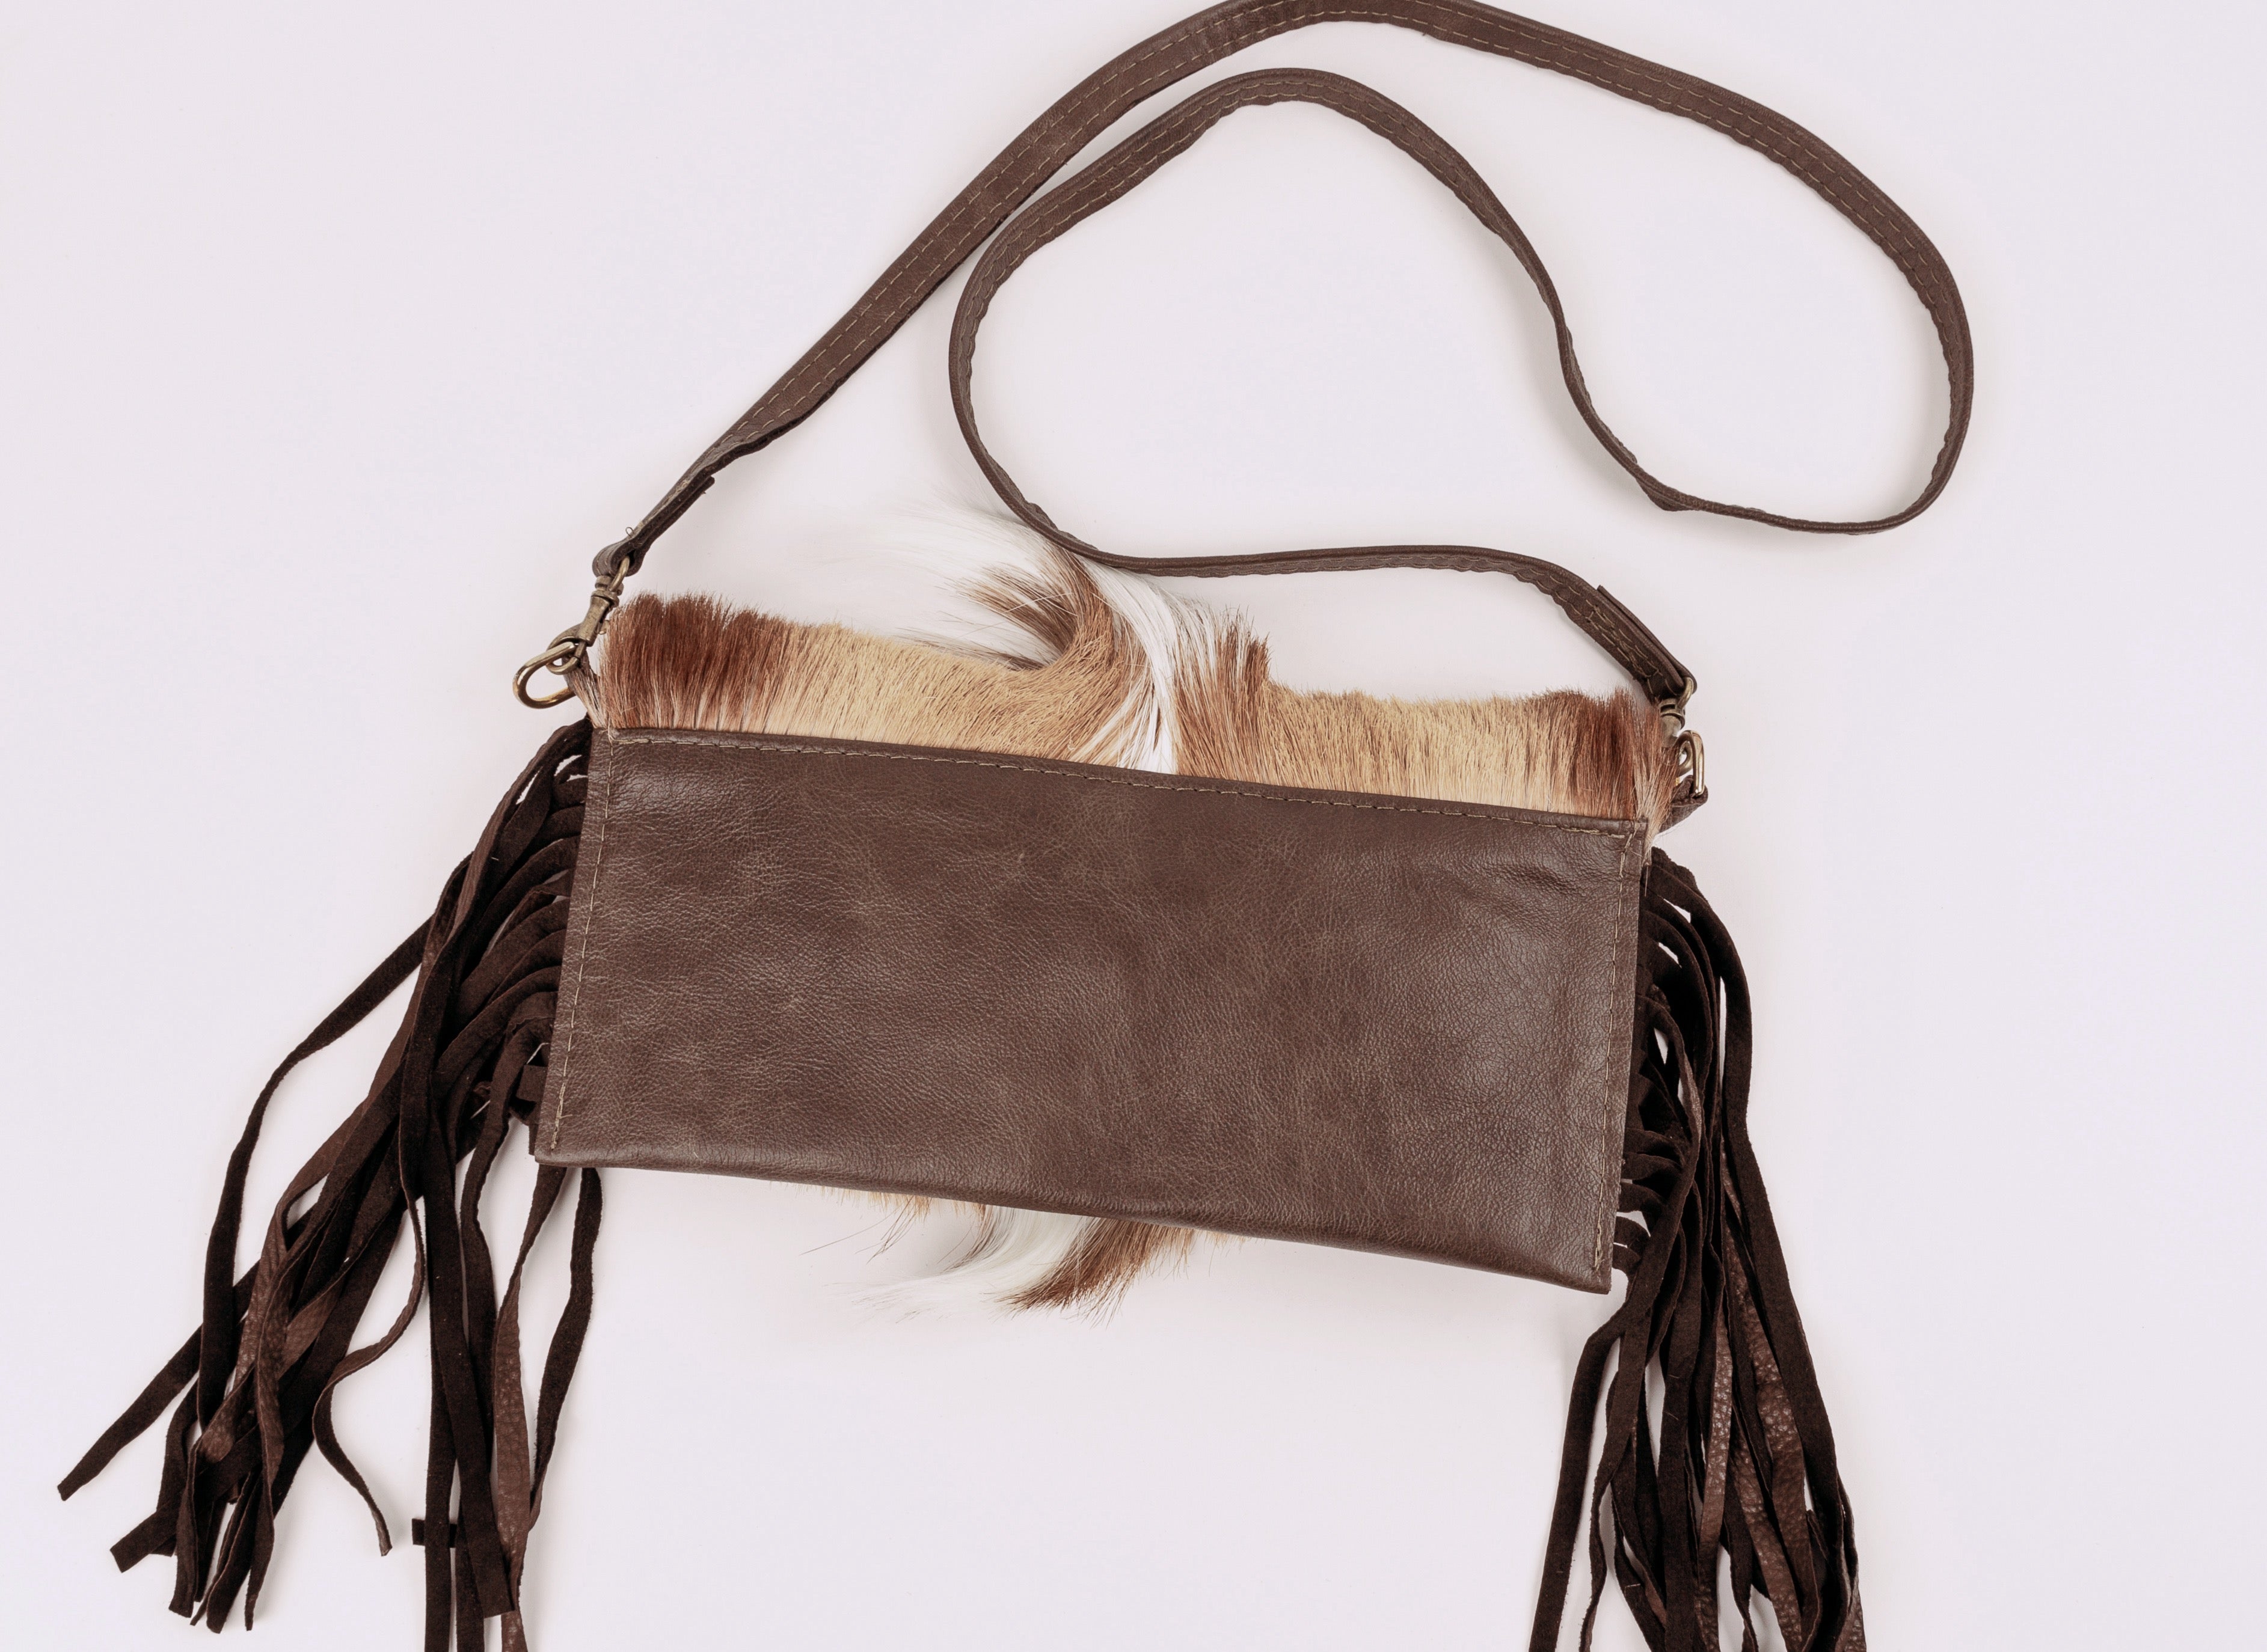 Springbok flap with brown leather Crossbody strap.